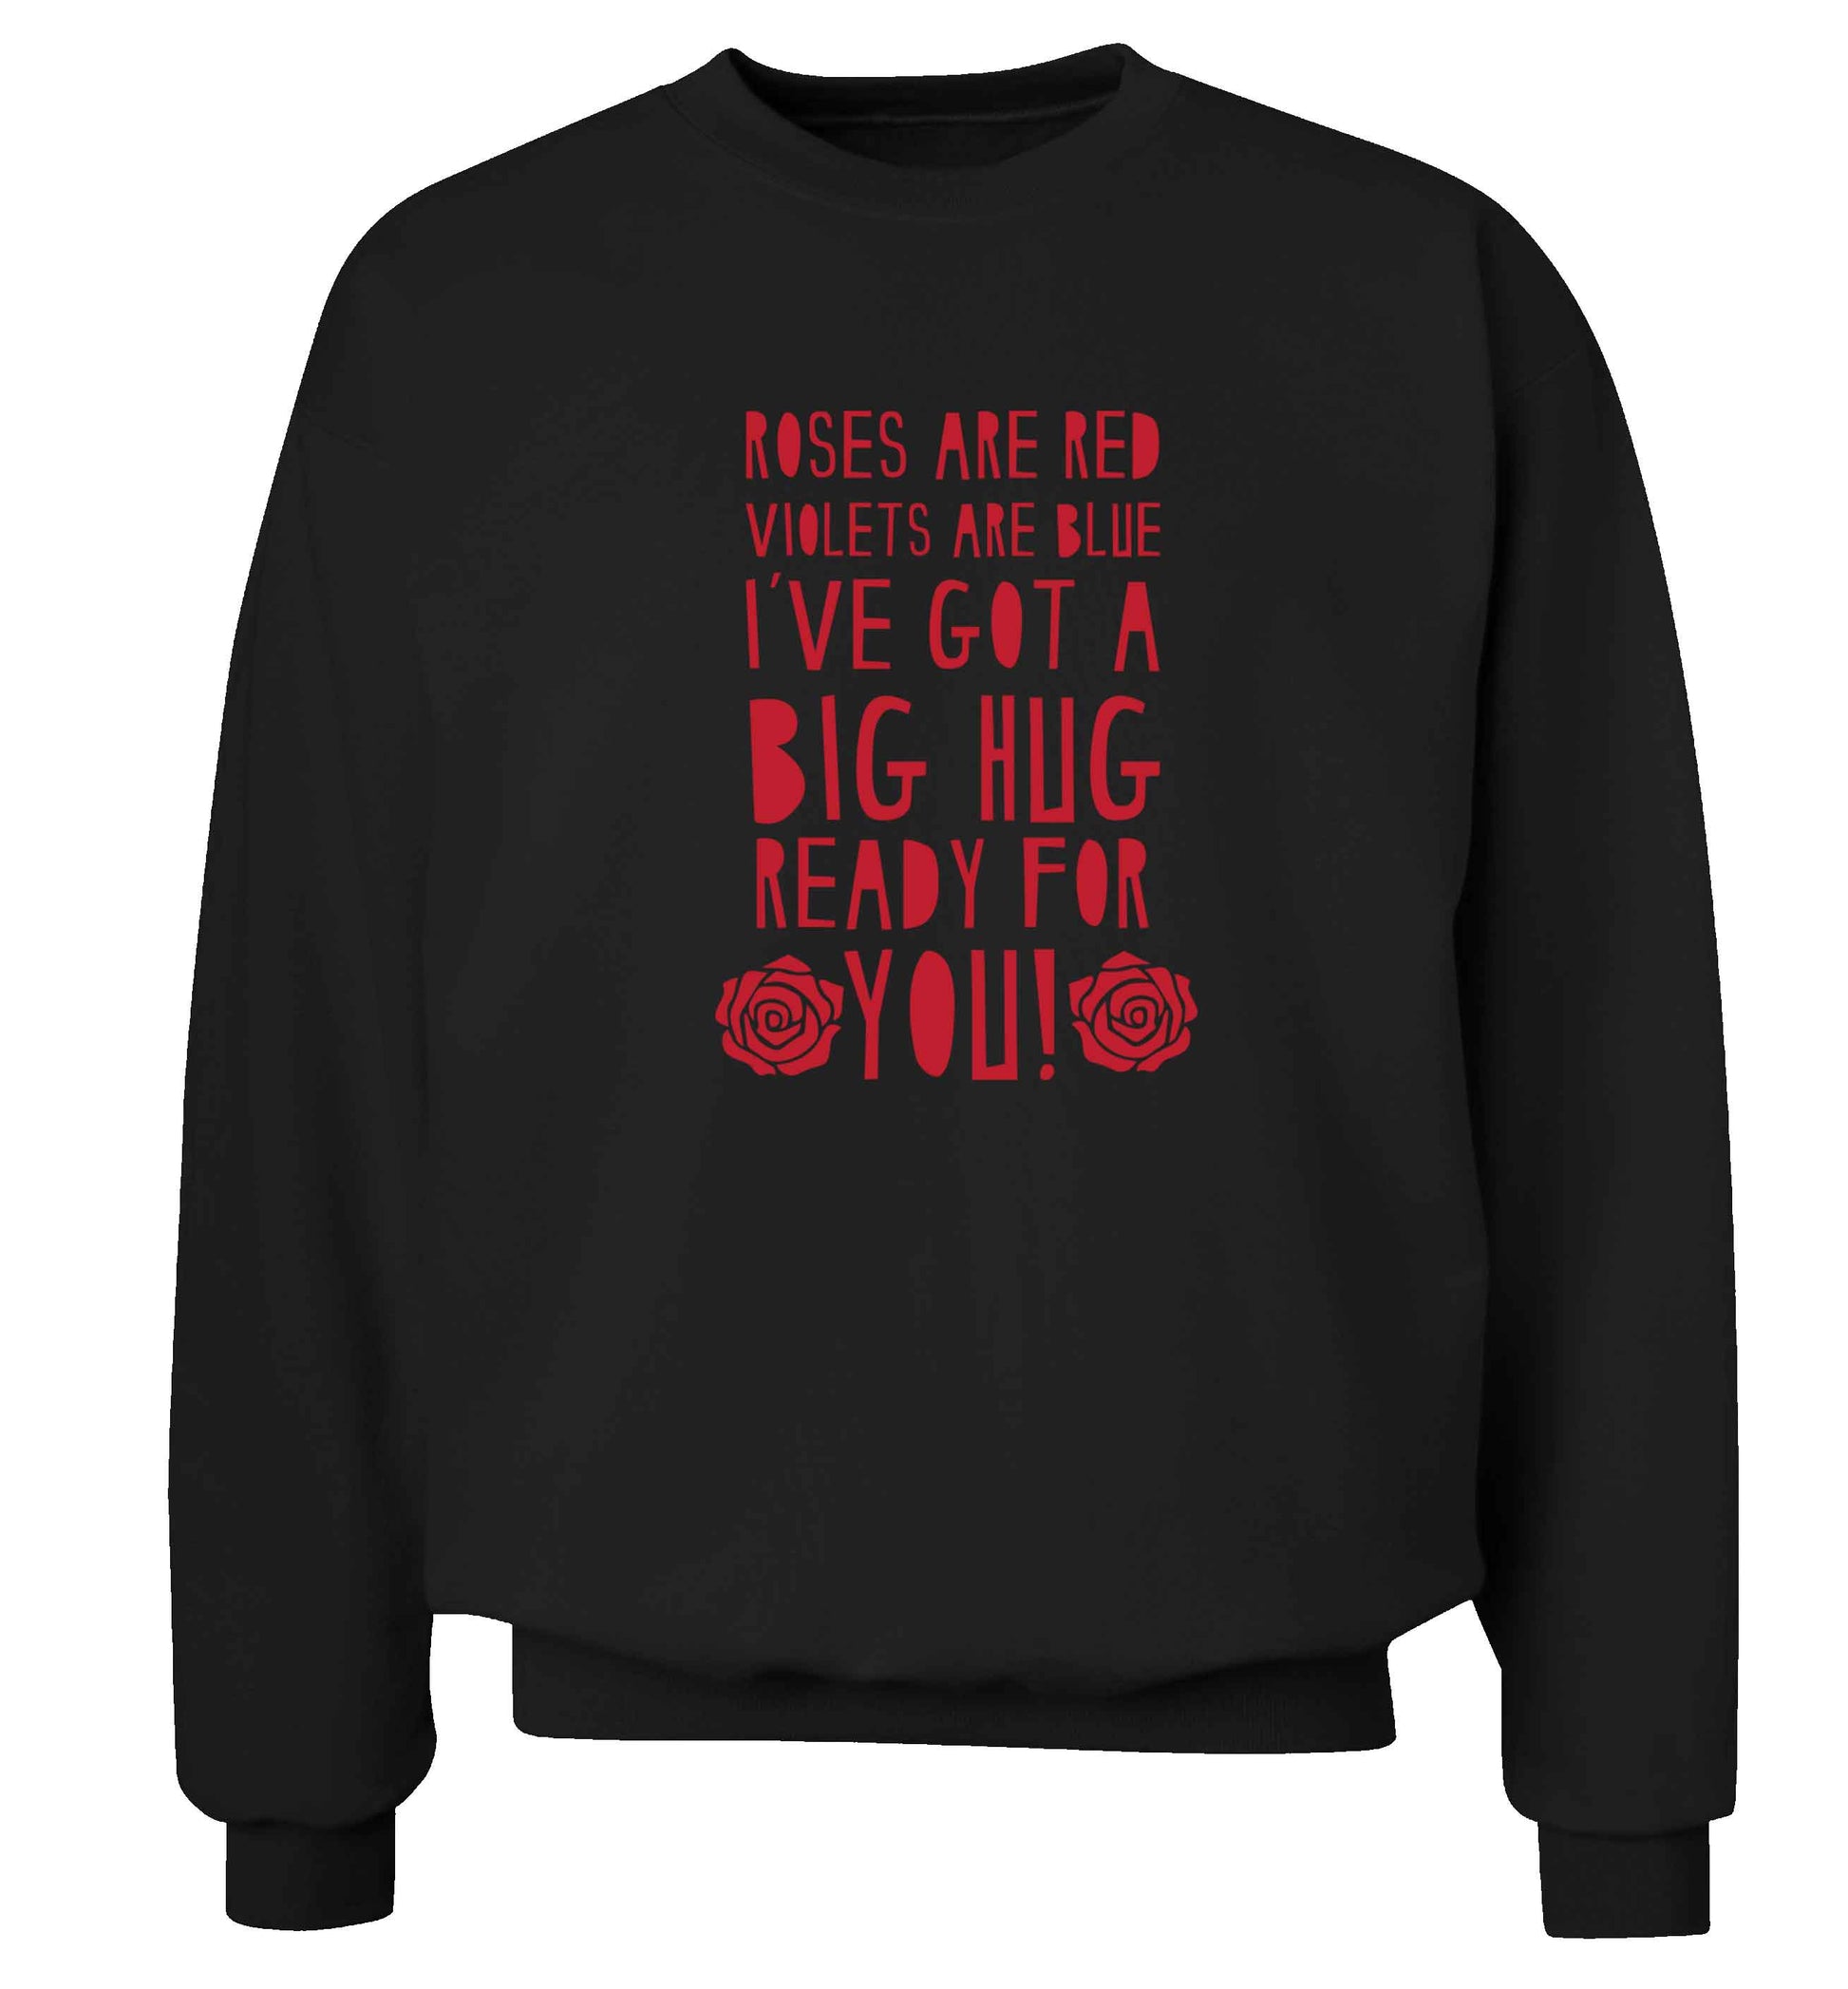 Roses are red violets are blue I've got a big hug coming for you adult's unisex black sweater 2XL